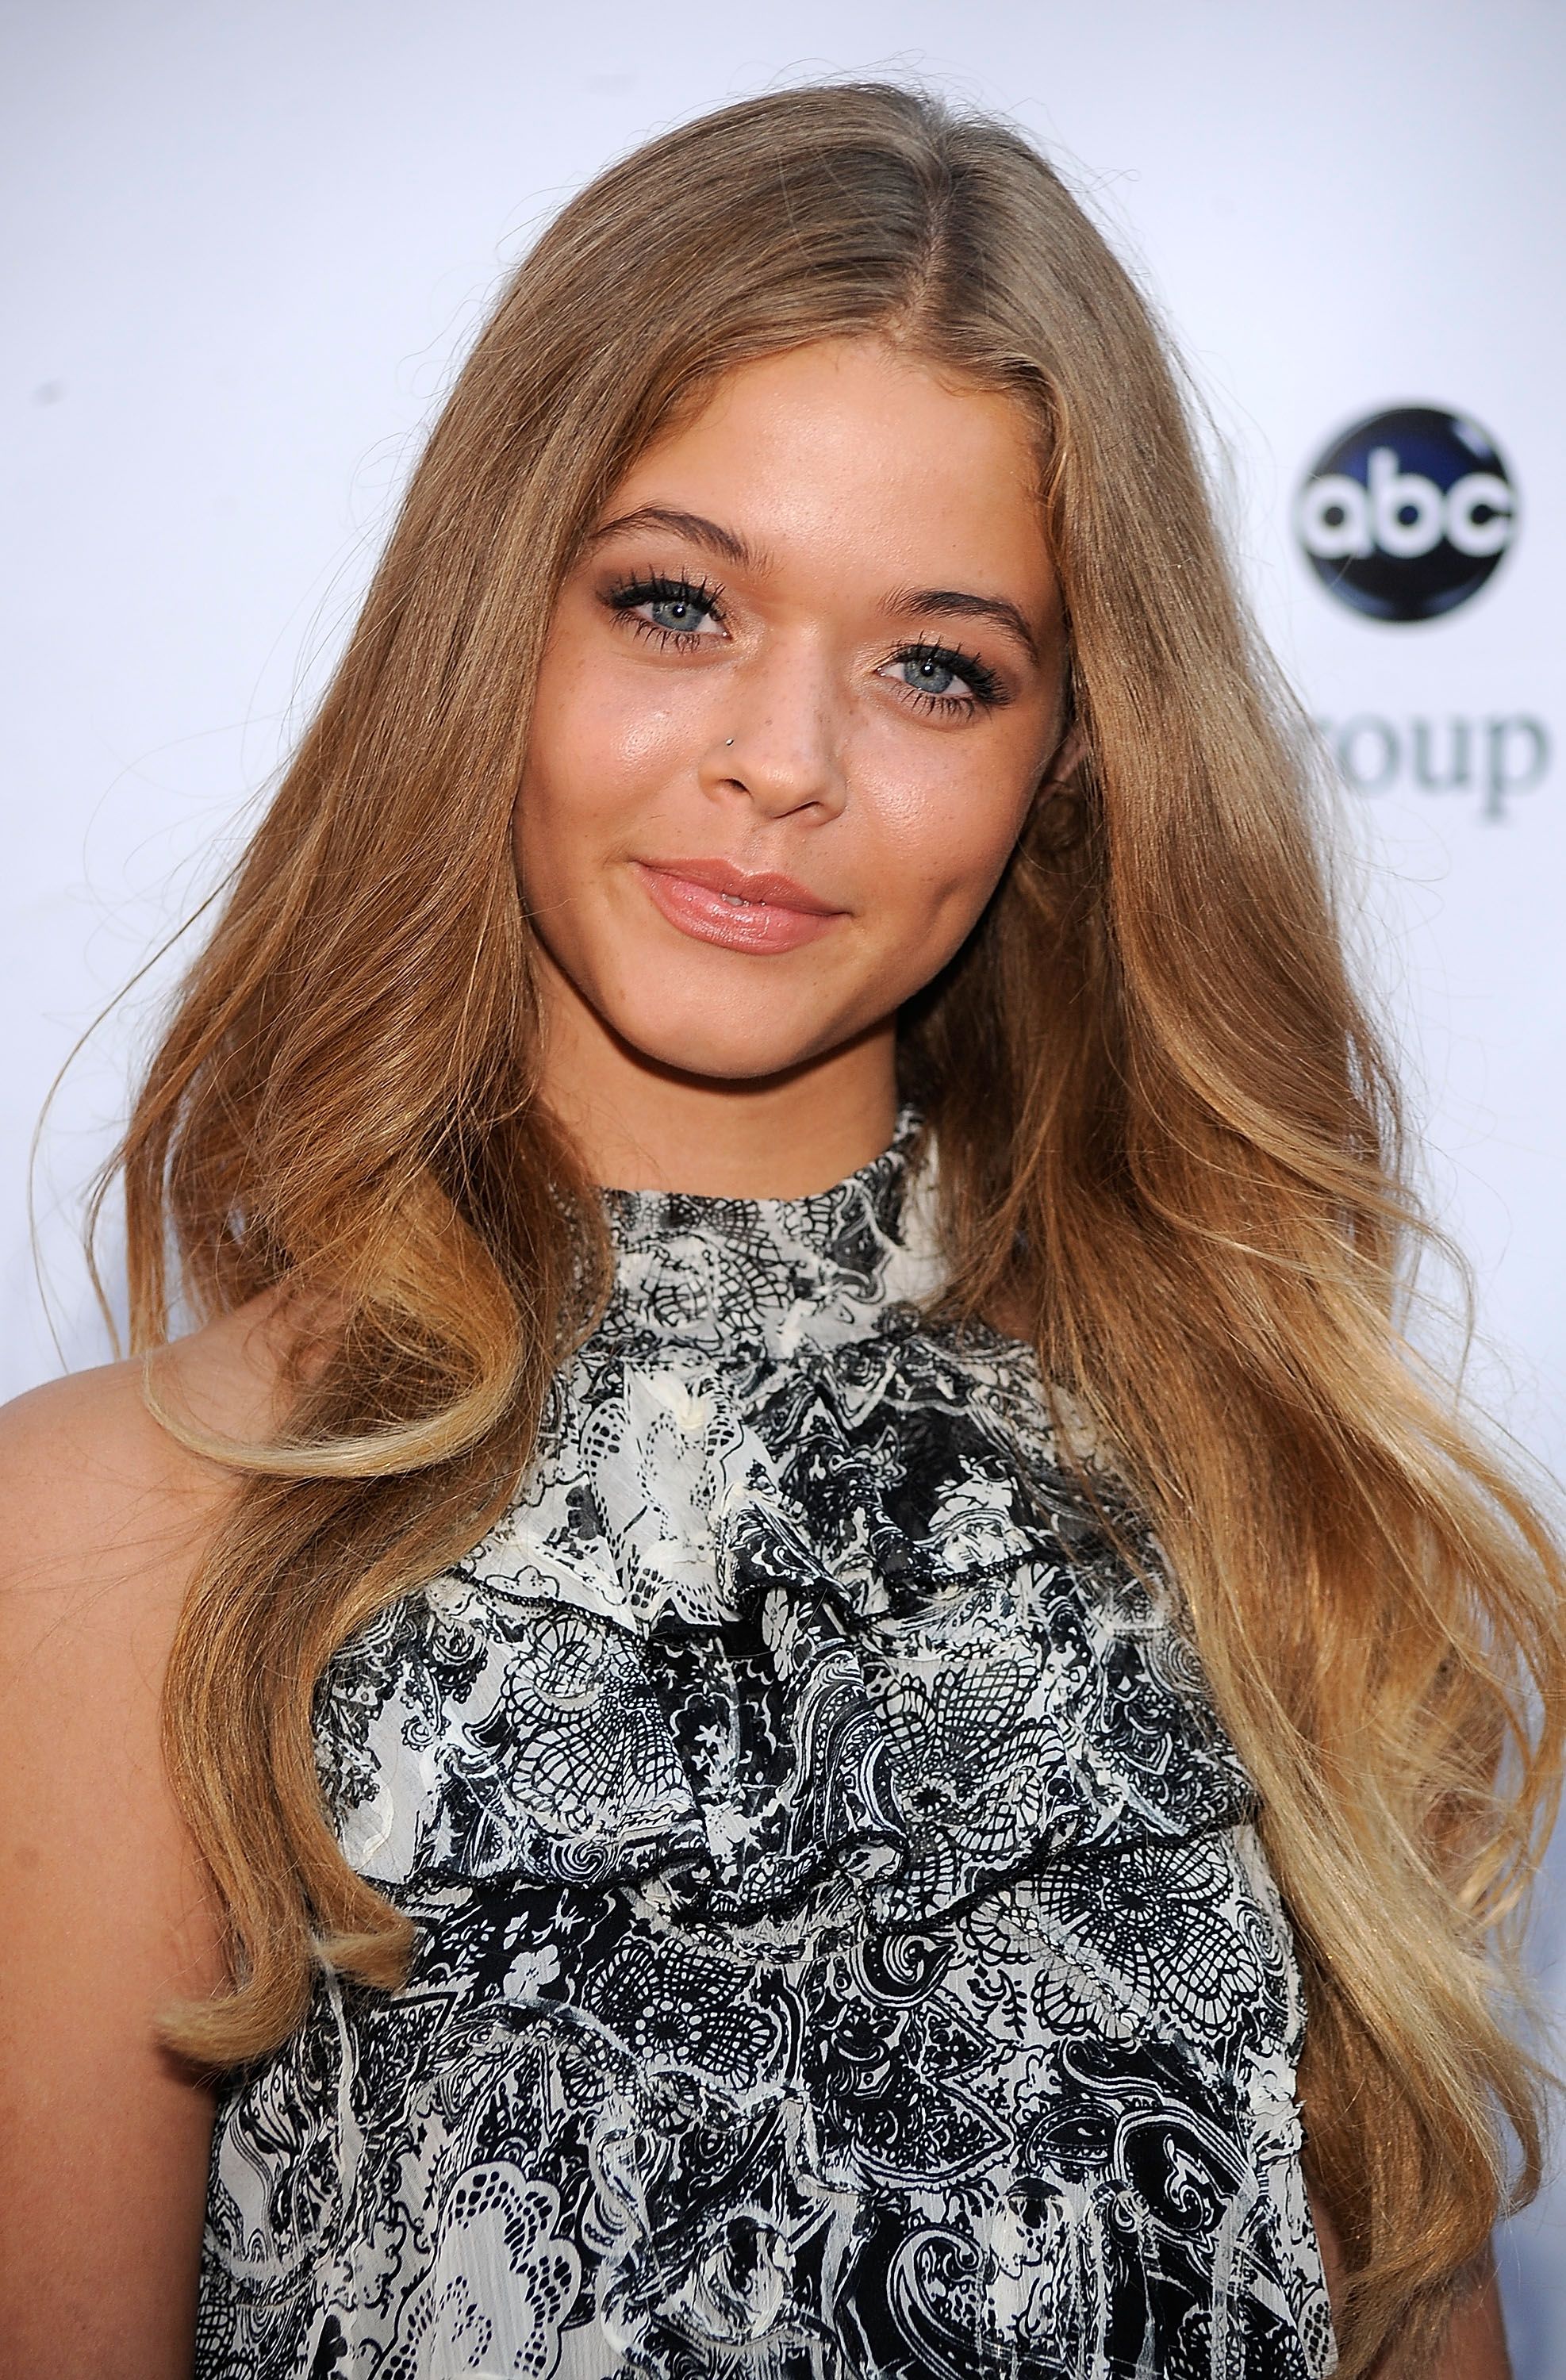 Sasha Pieterse at the Disney-ABC Television Group Summer Press Tour Party on August 8, 2009, in Pasadena, California | Photo: Frazer Harrison/Getty Images